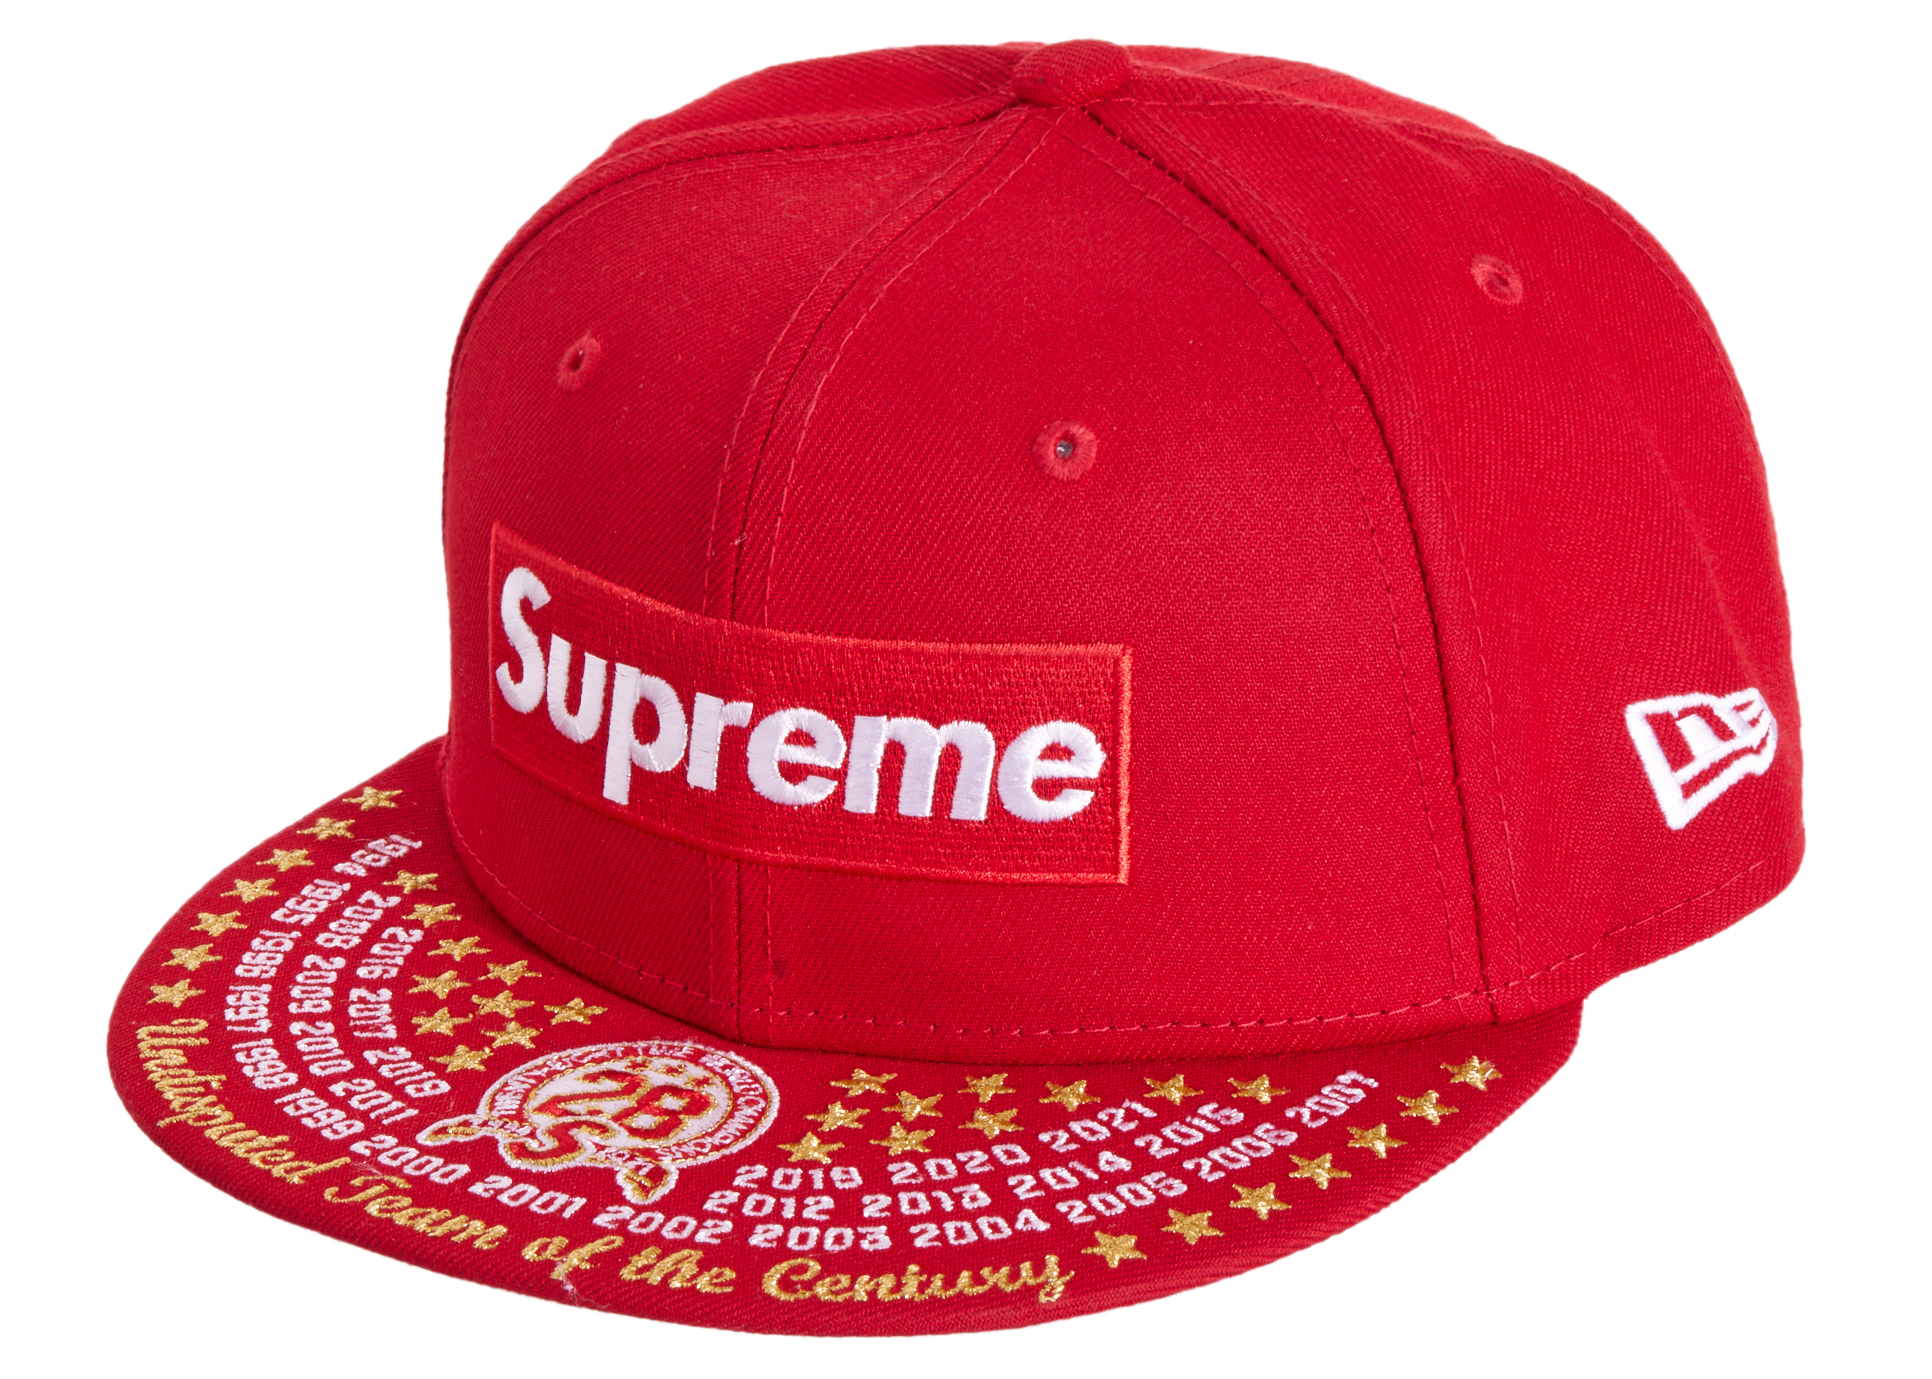 Supreme Undisputed Box Logo New Era Fitted Hat Navy - FW21 - US